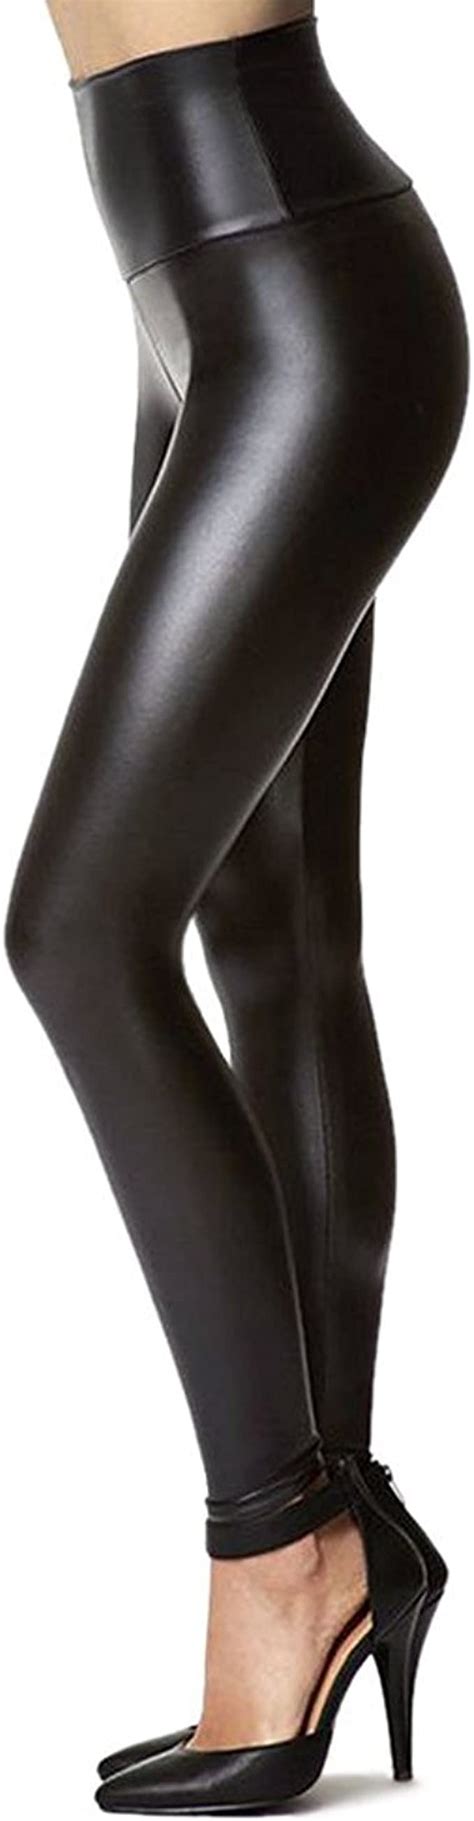 women s stretchy faux leather leggings pants sexy black high waisted tights xxxx large